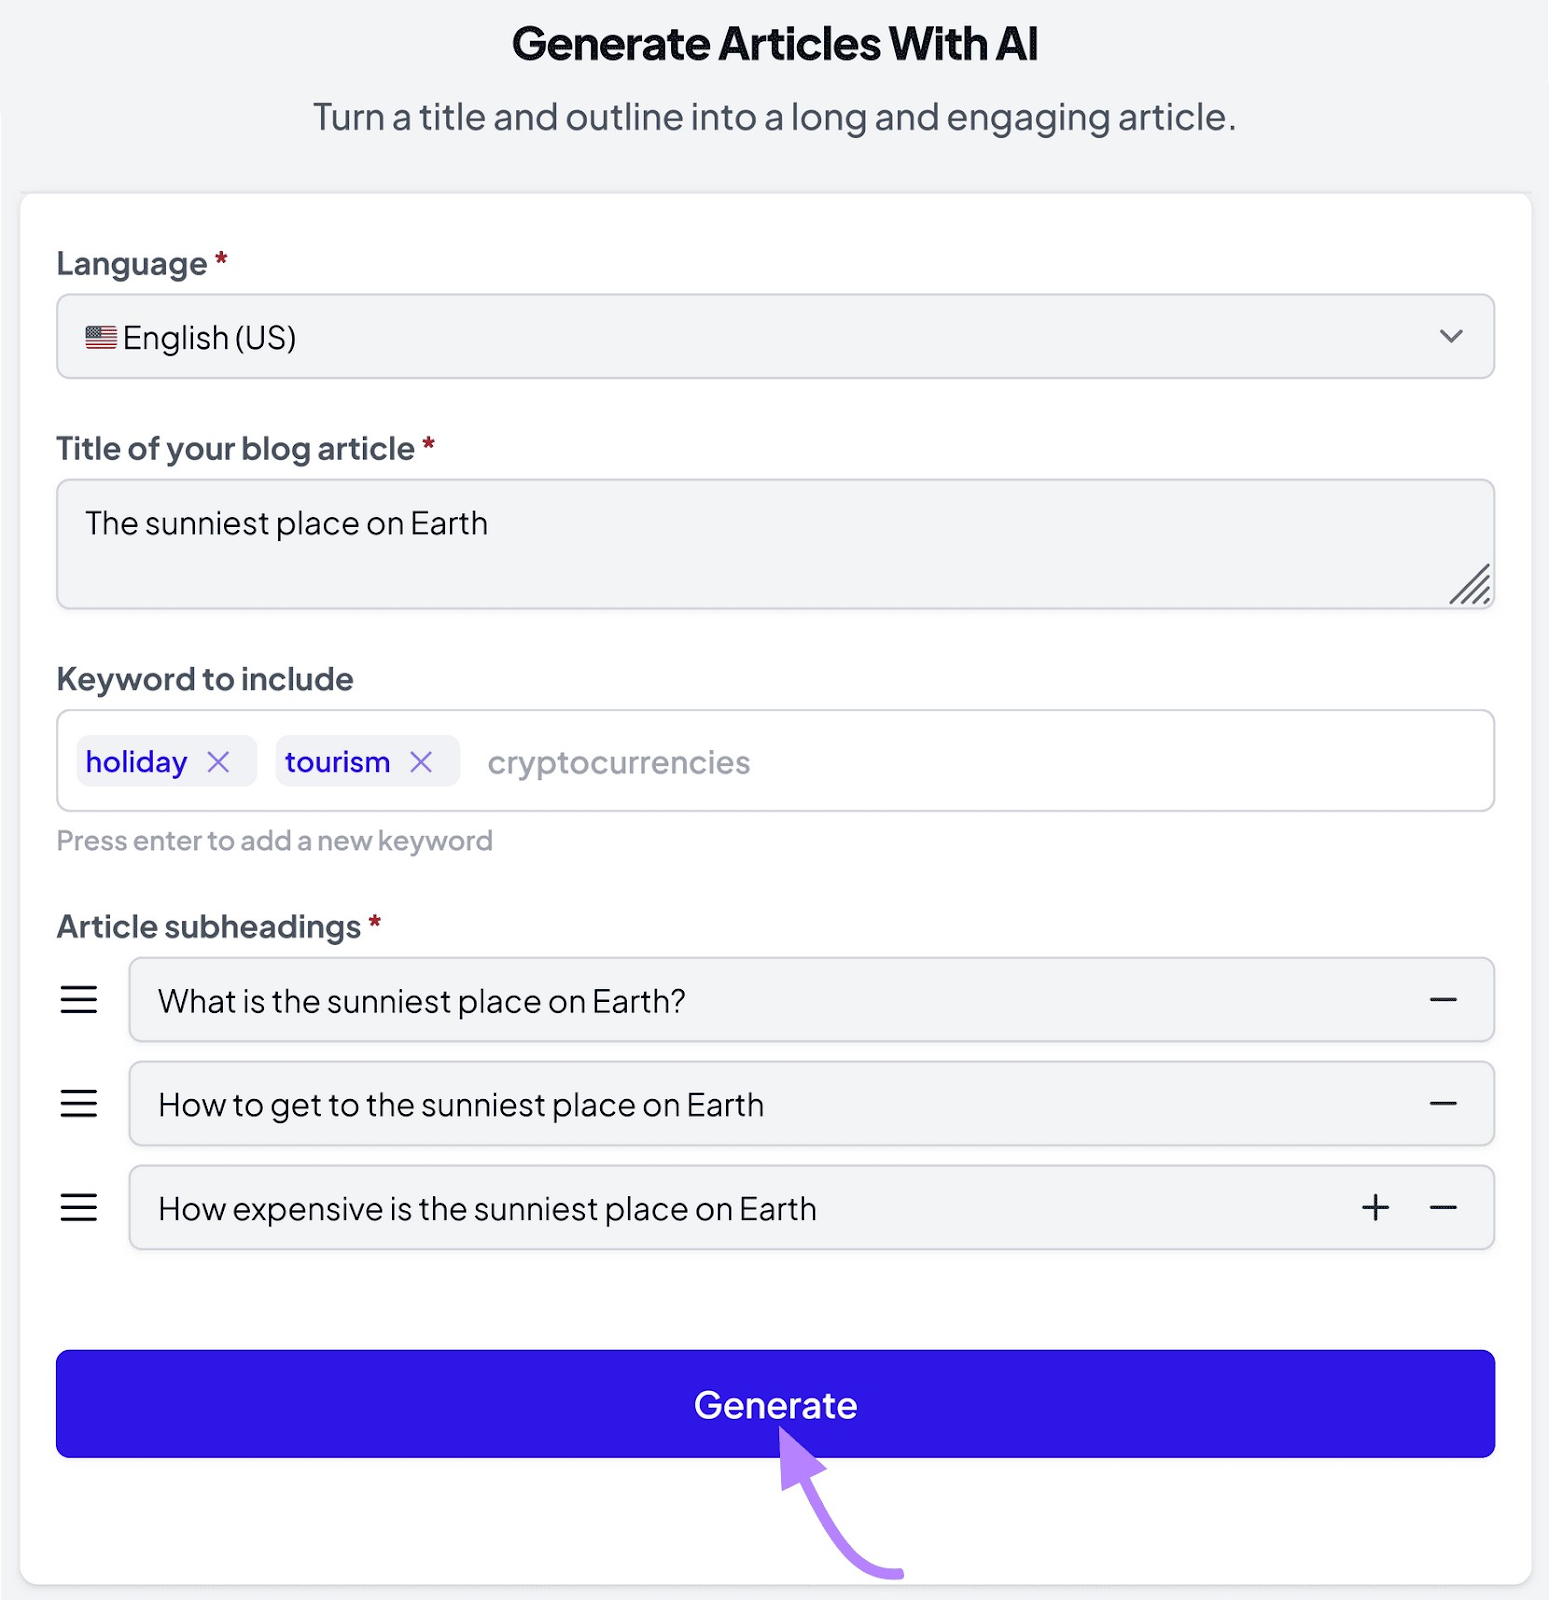 "Generate Articles With AI" window